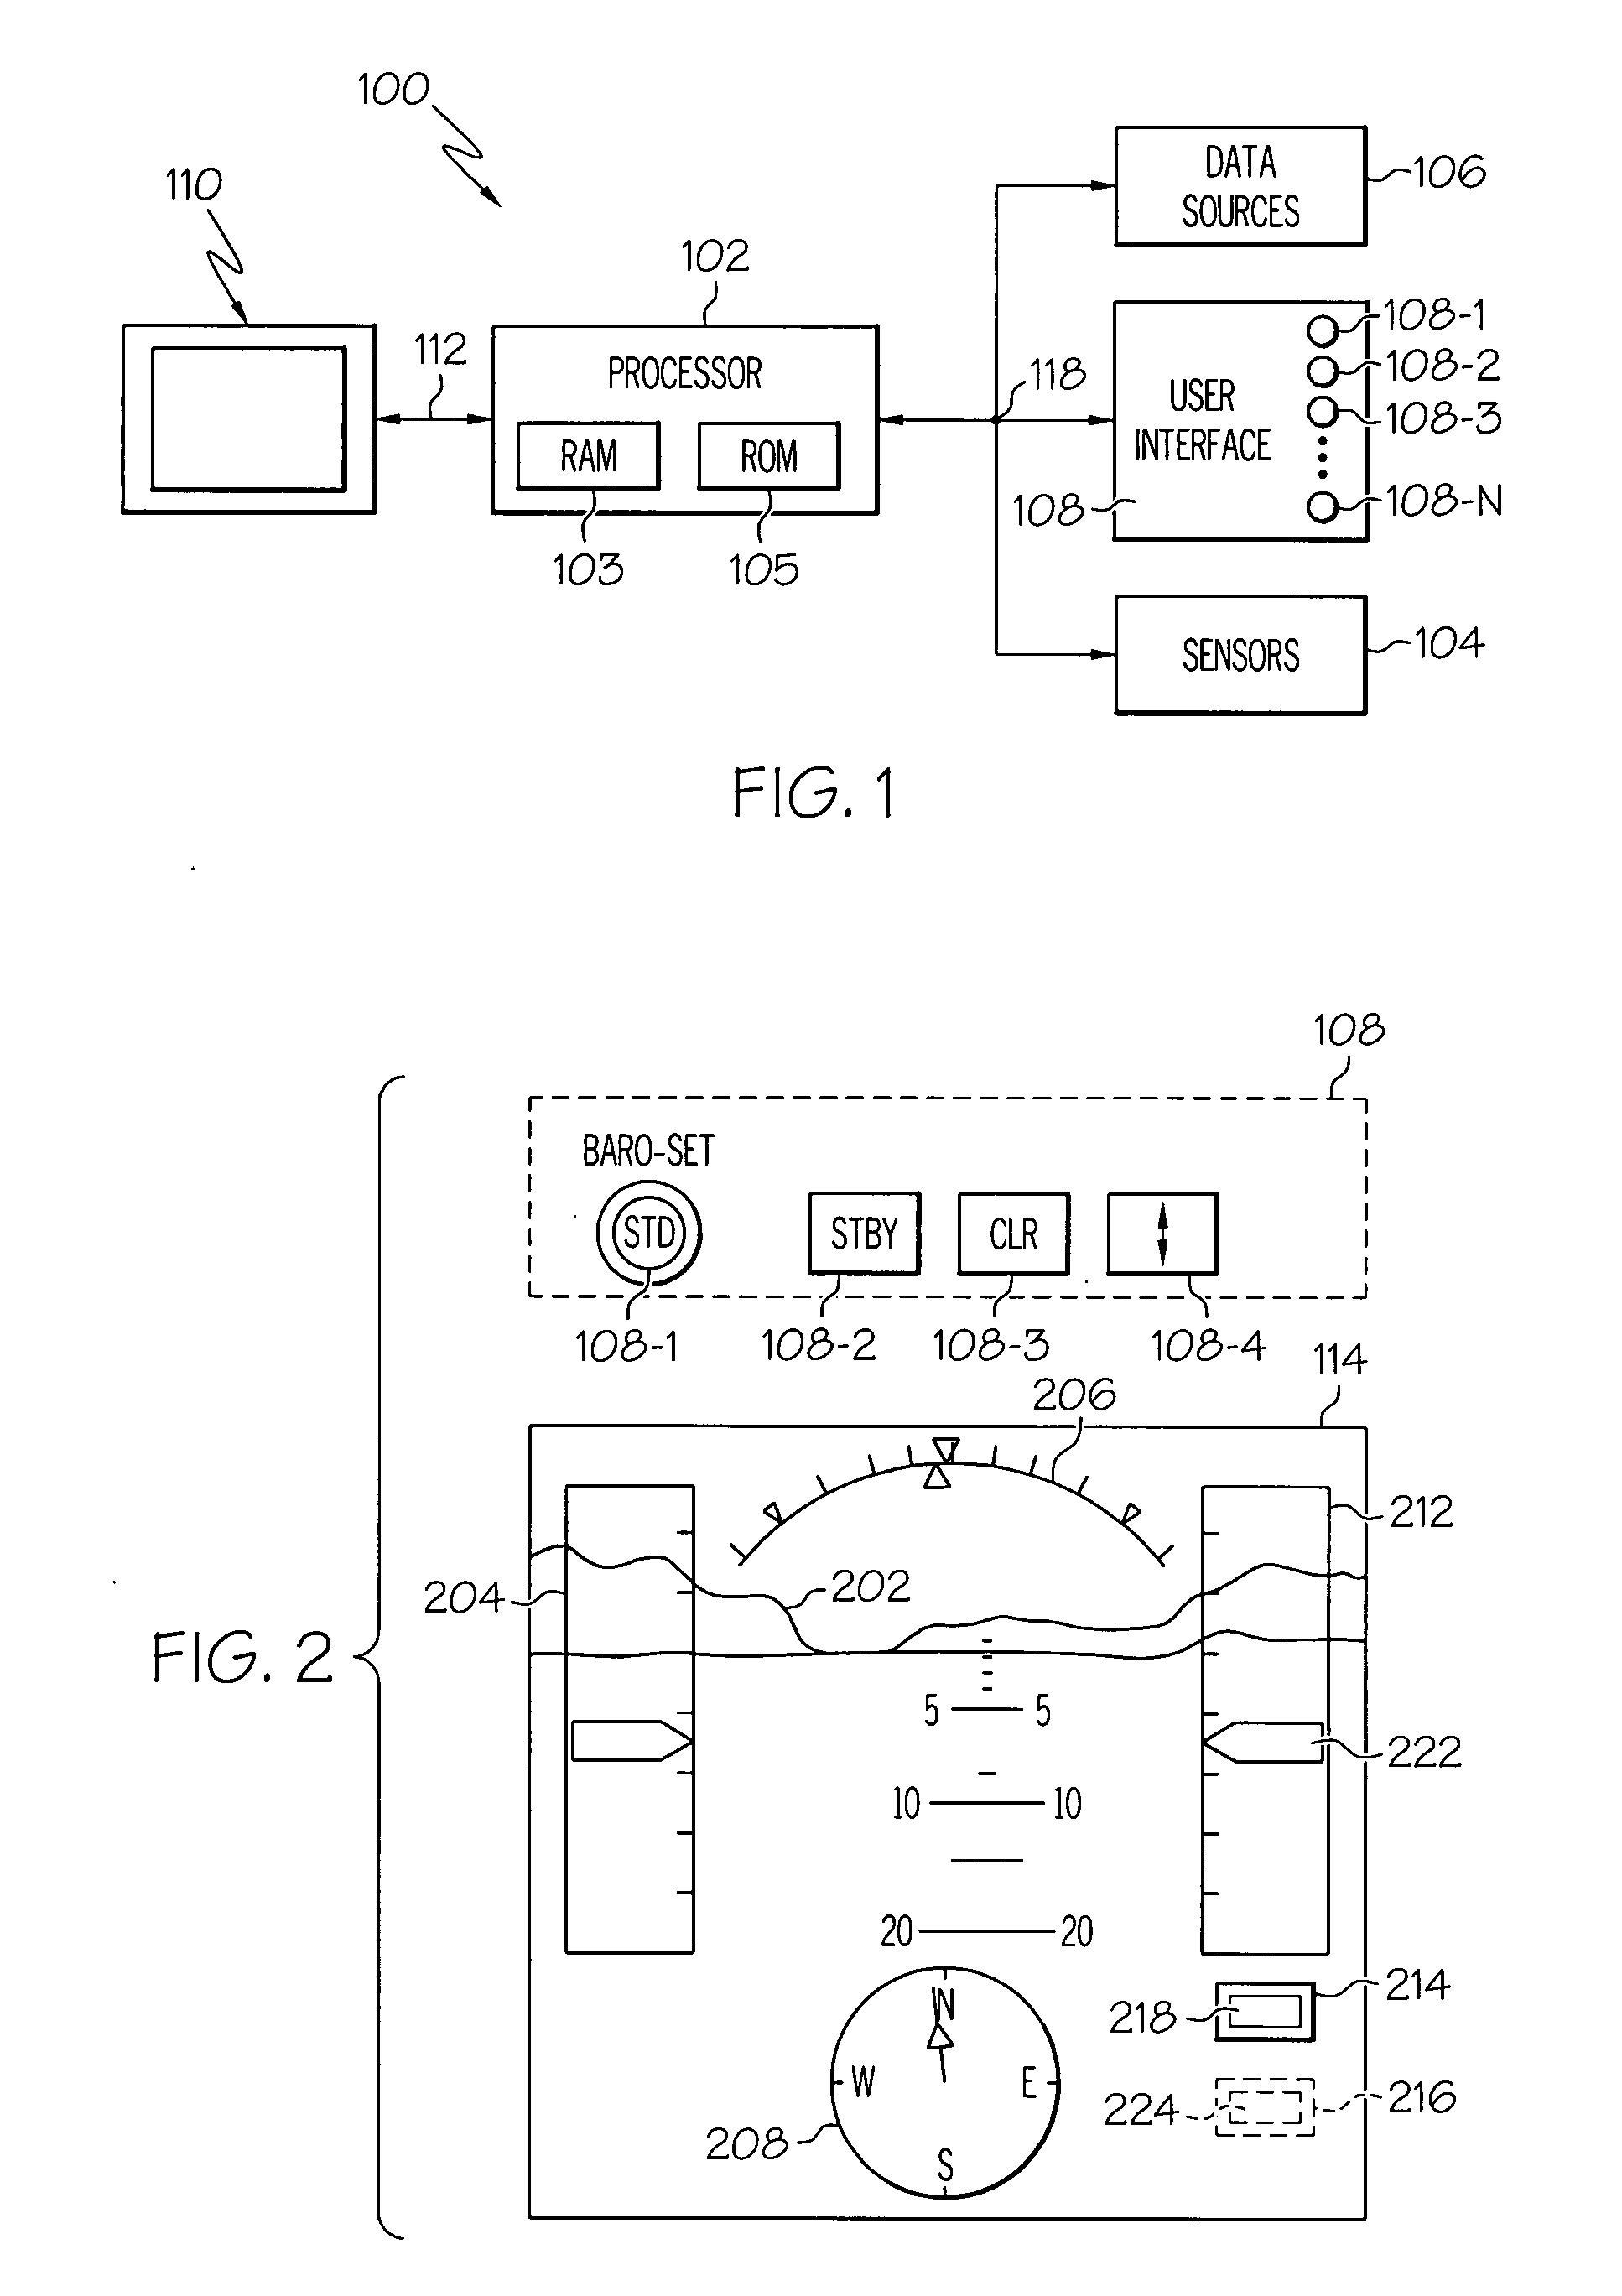 Altimeter setting display and storage system and method